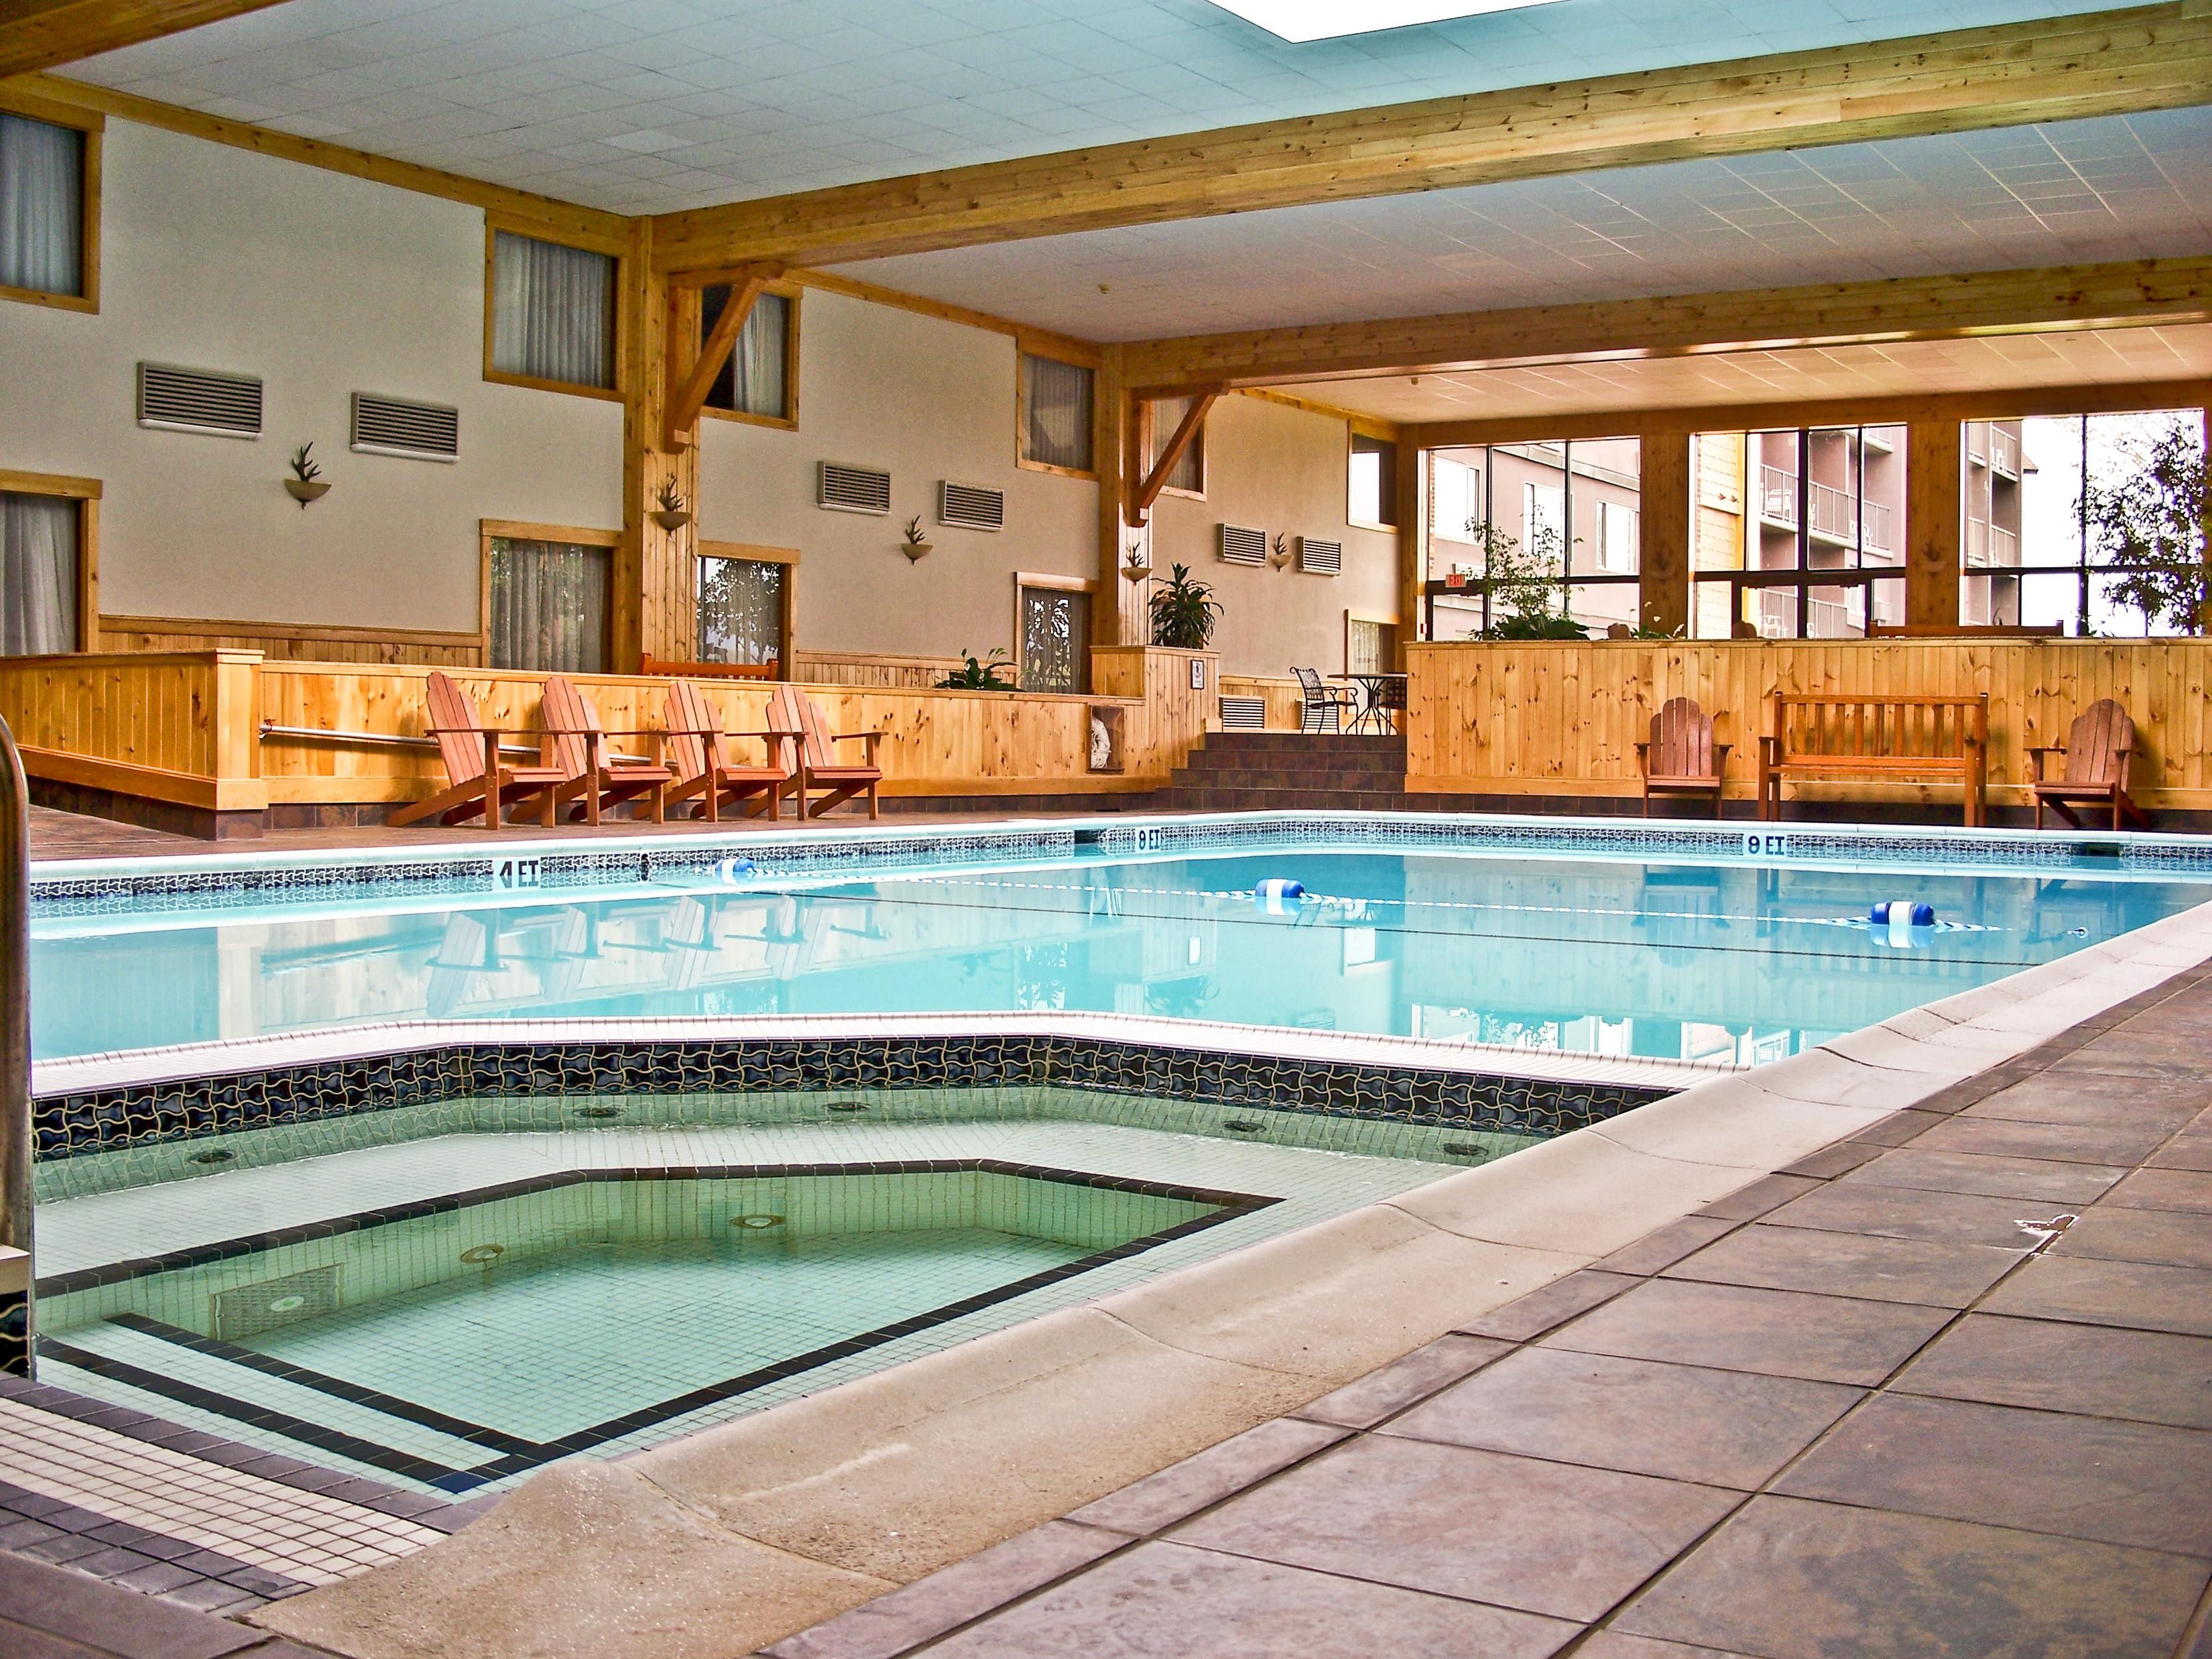 Take a swim in our large ADA-compliant indoor pool, or a relaxing dip in the hot tub. With plenty of seating in the pavilion, and large windows offering an abundance of natural light, it's a great place to unwind after a busy day. 